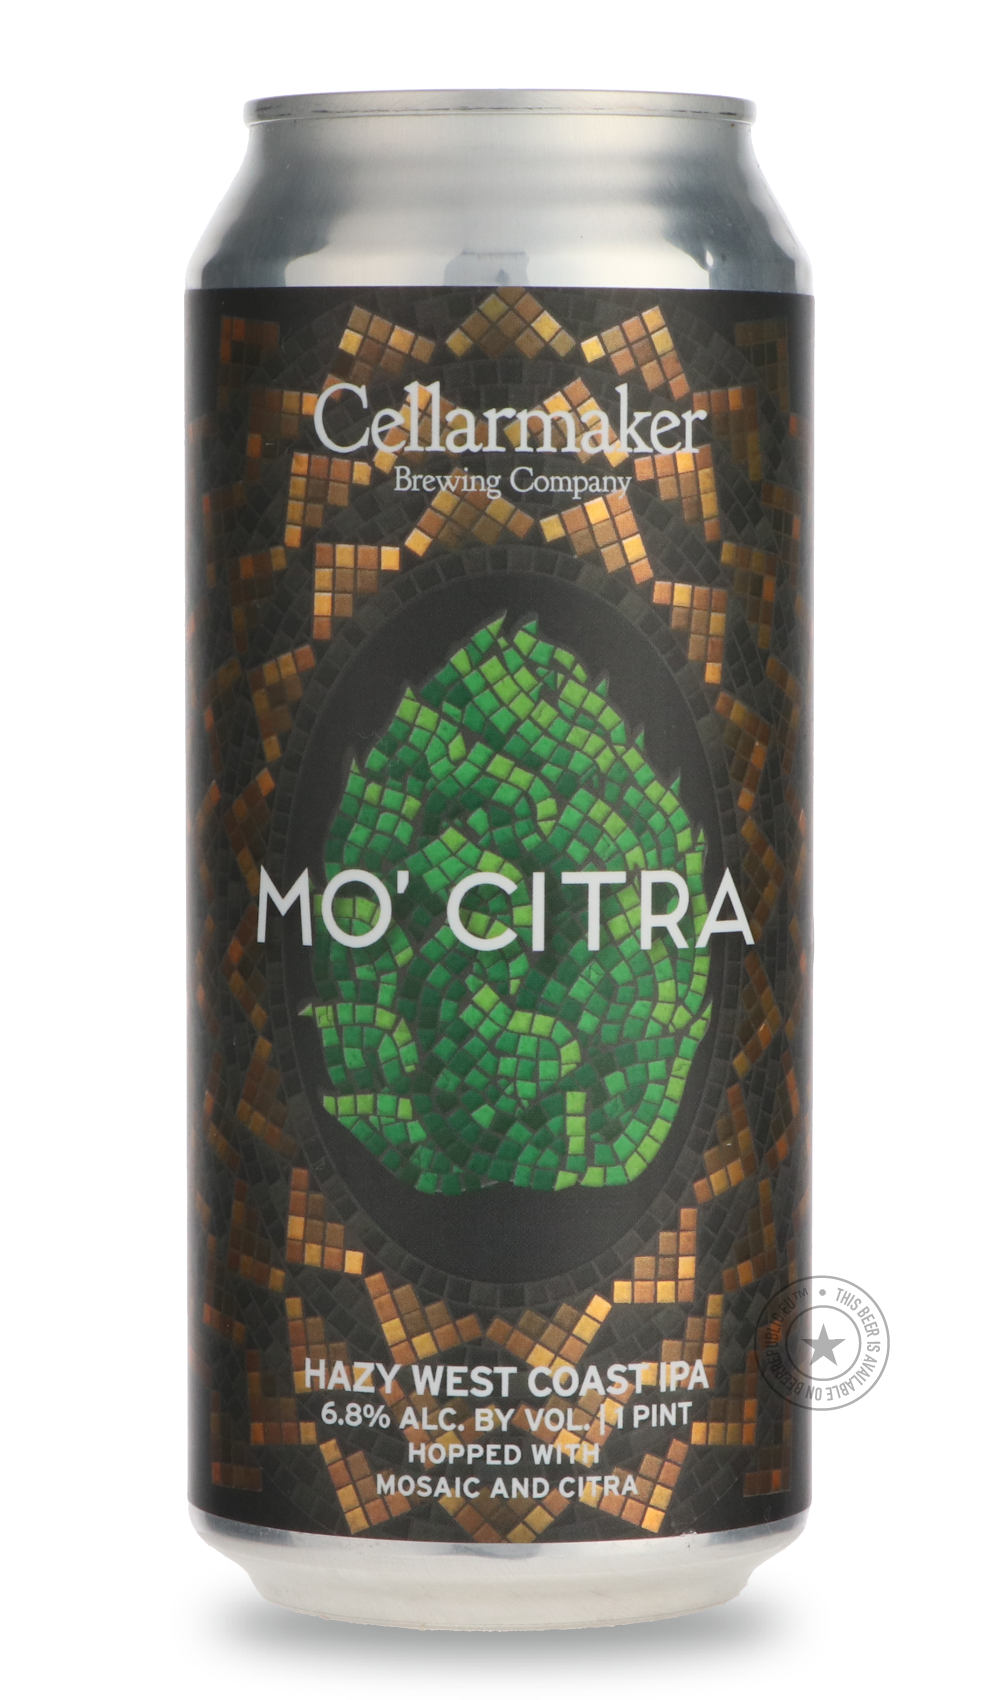 -Cellarmaker- Mo' Citra-IPA- Only @ Beer Republic - The best online beer store for American & Canadian craft beer - Buy beer online from the USA and Canada - Bier online kopen - Amerikaans bier kopen - Craft beer store - Craft beer kopen - Amerikanisch bier kaufen - Bier online kaufen - Acheter biere online - IPA - Stout - Porter - New England IPA - Hazy IPA - Imperial Stout - Barrel Aged - Barrel Aged Imperial Stout - Brown - Dark beer - Blond - Blonde - Pilsner - Lager - Wheat - Weizen - Amber - Barley Wi